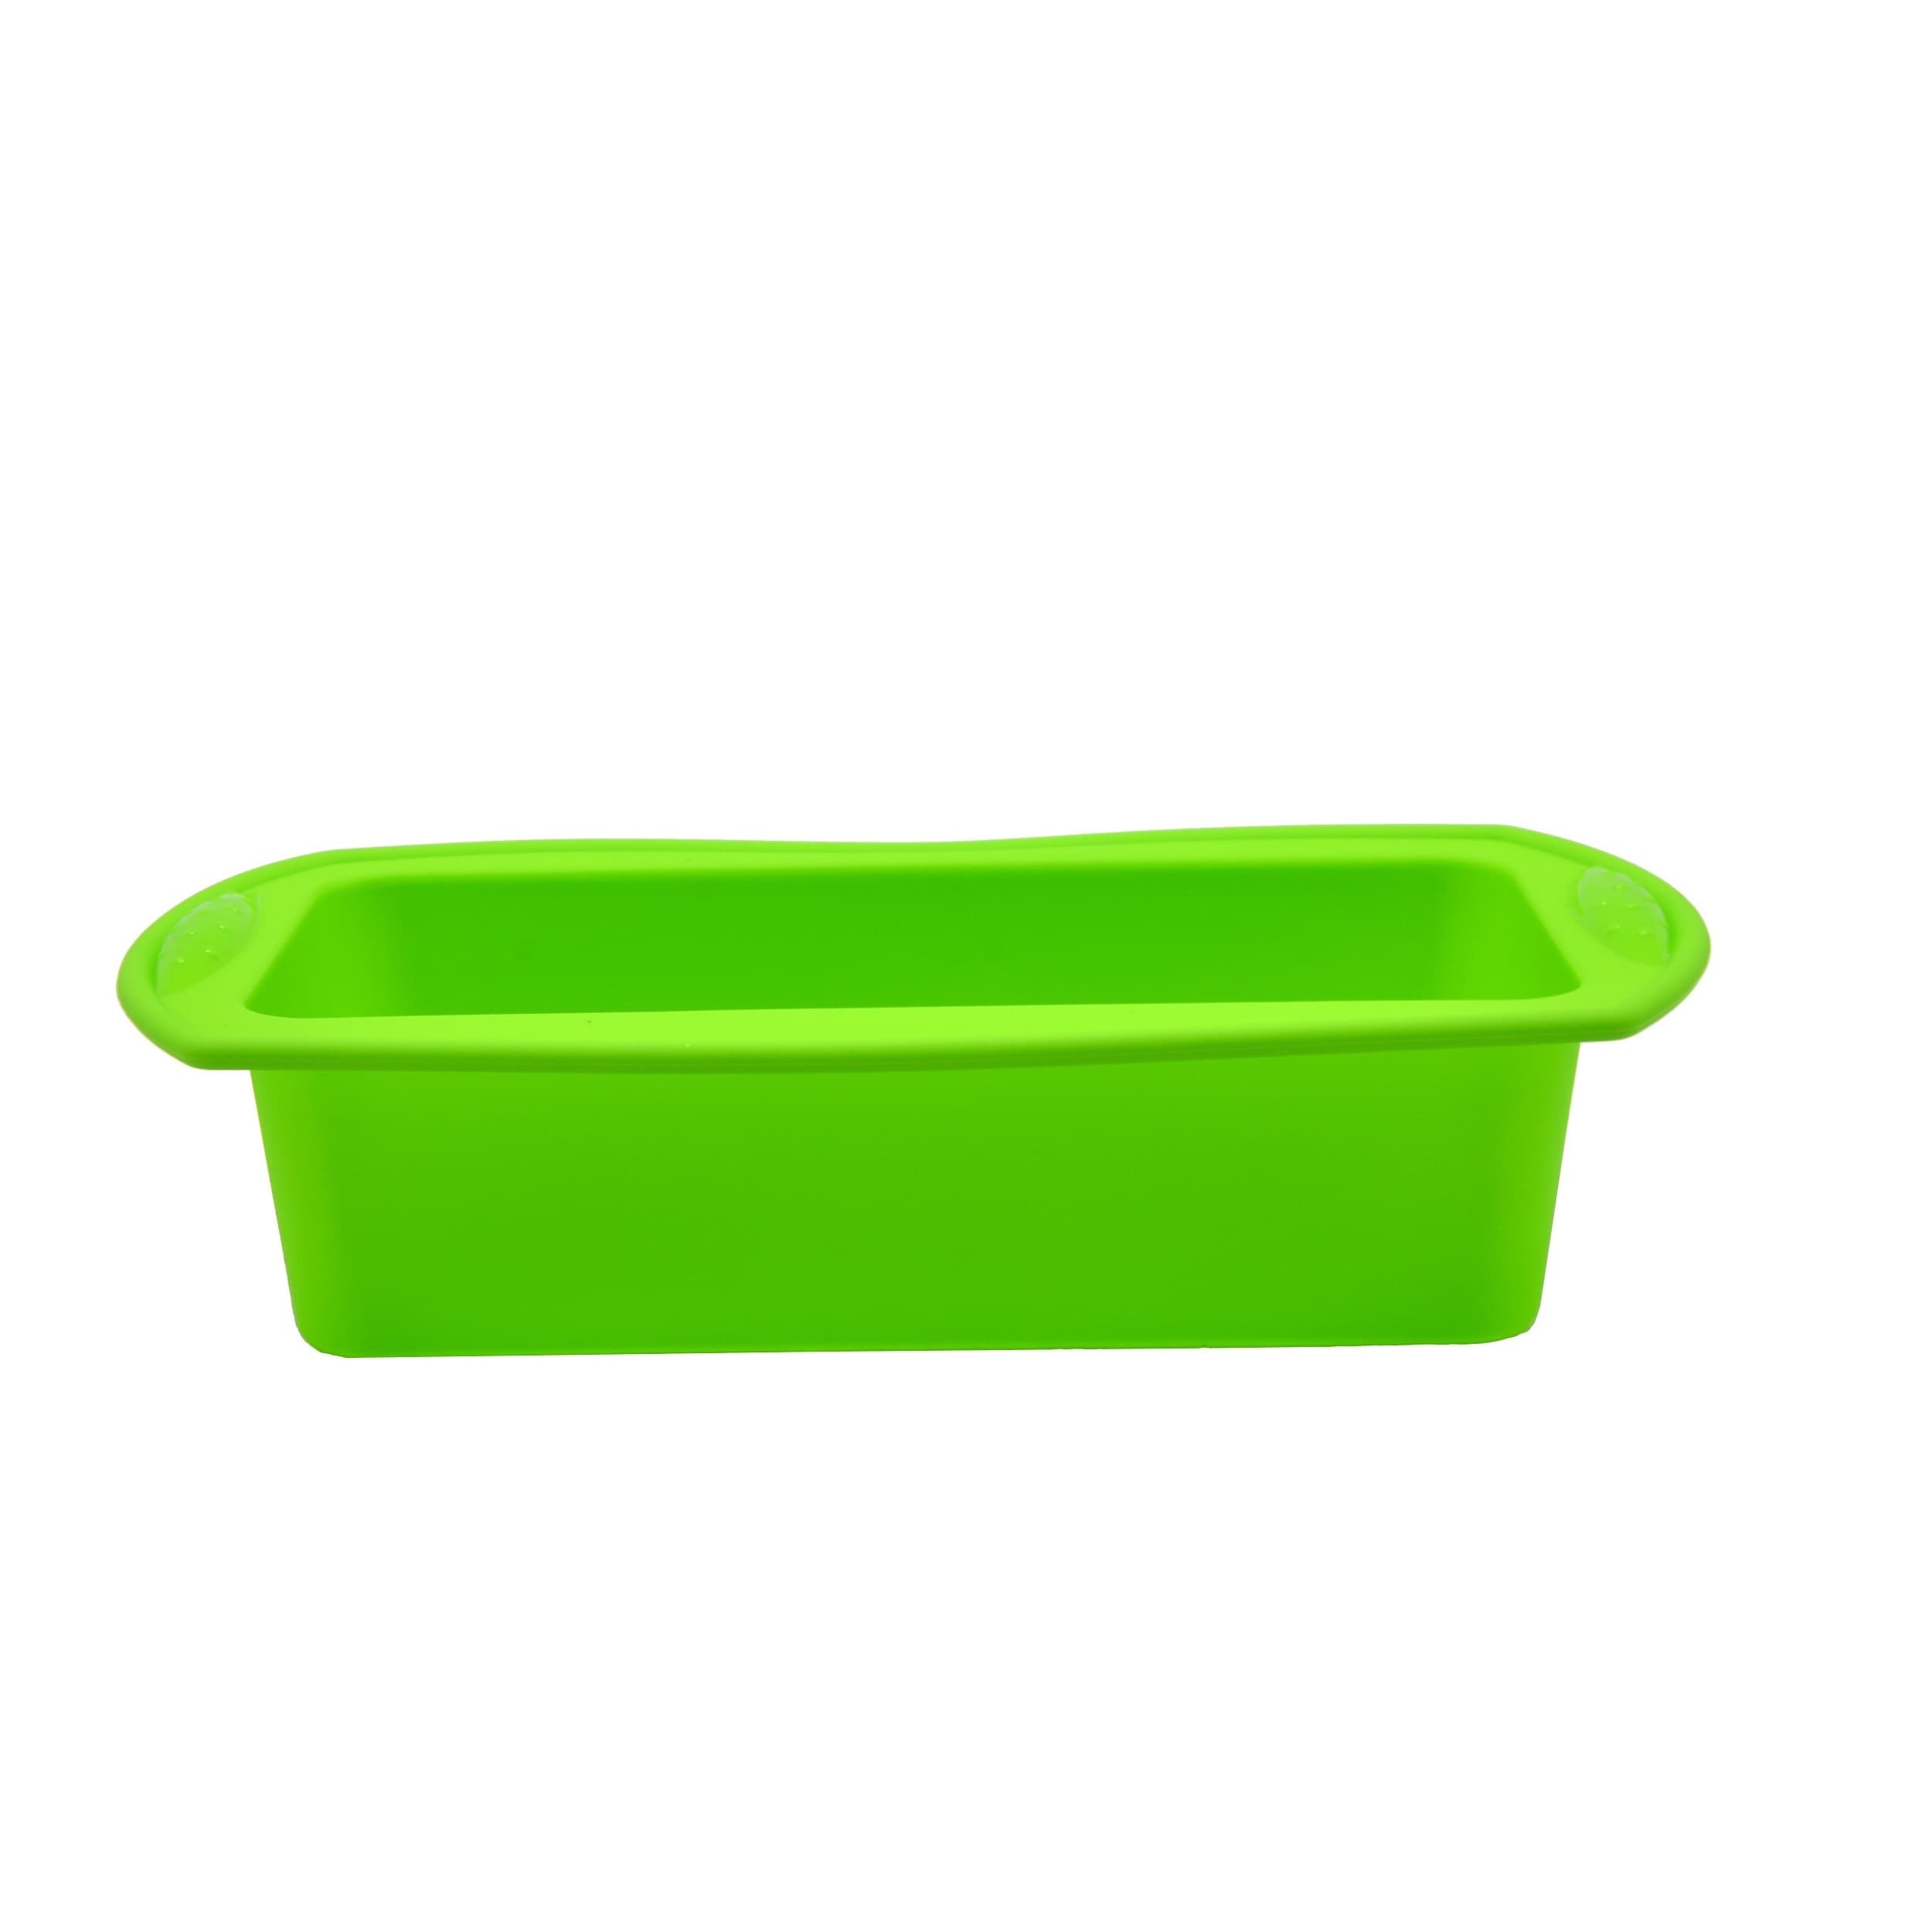 https://ak1.ostkcdn.com/images/products/12647081/Orange-and-Green-Silicone-Rectangular-Cake-Loaf-Pan-Set-Set-of-2-f4f891a3-2a88-4d1e-a636-34462dd53ba2.jpg